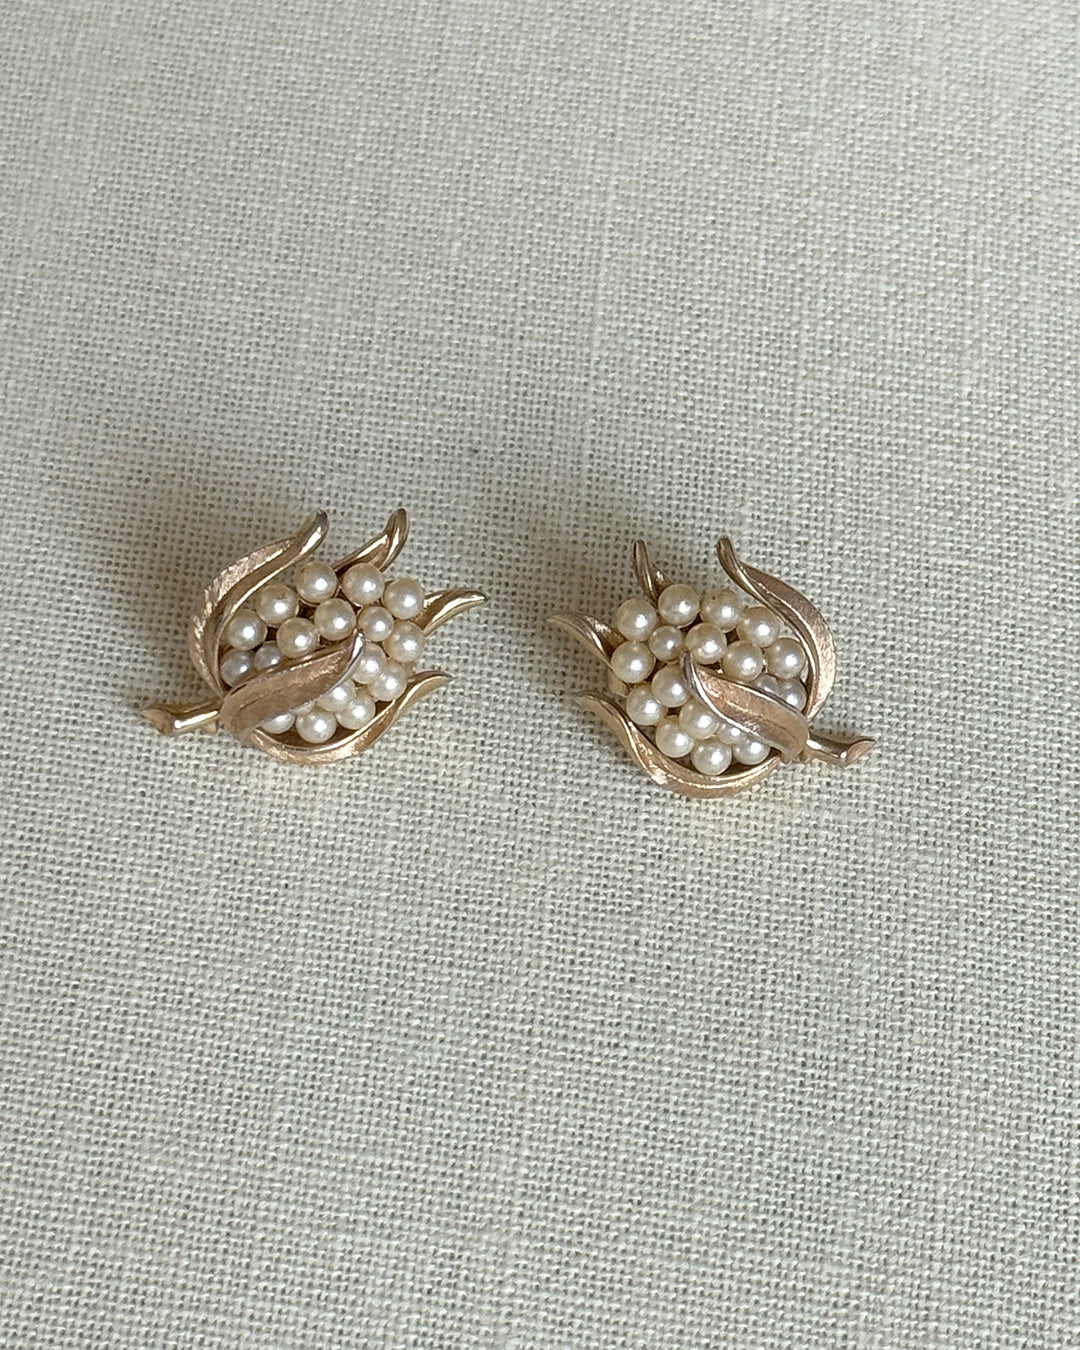 Vintage 1950s Trifari Lily Of The Valley Flower Earrings